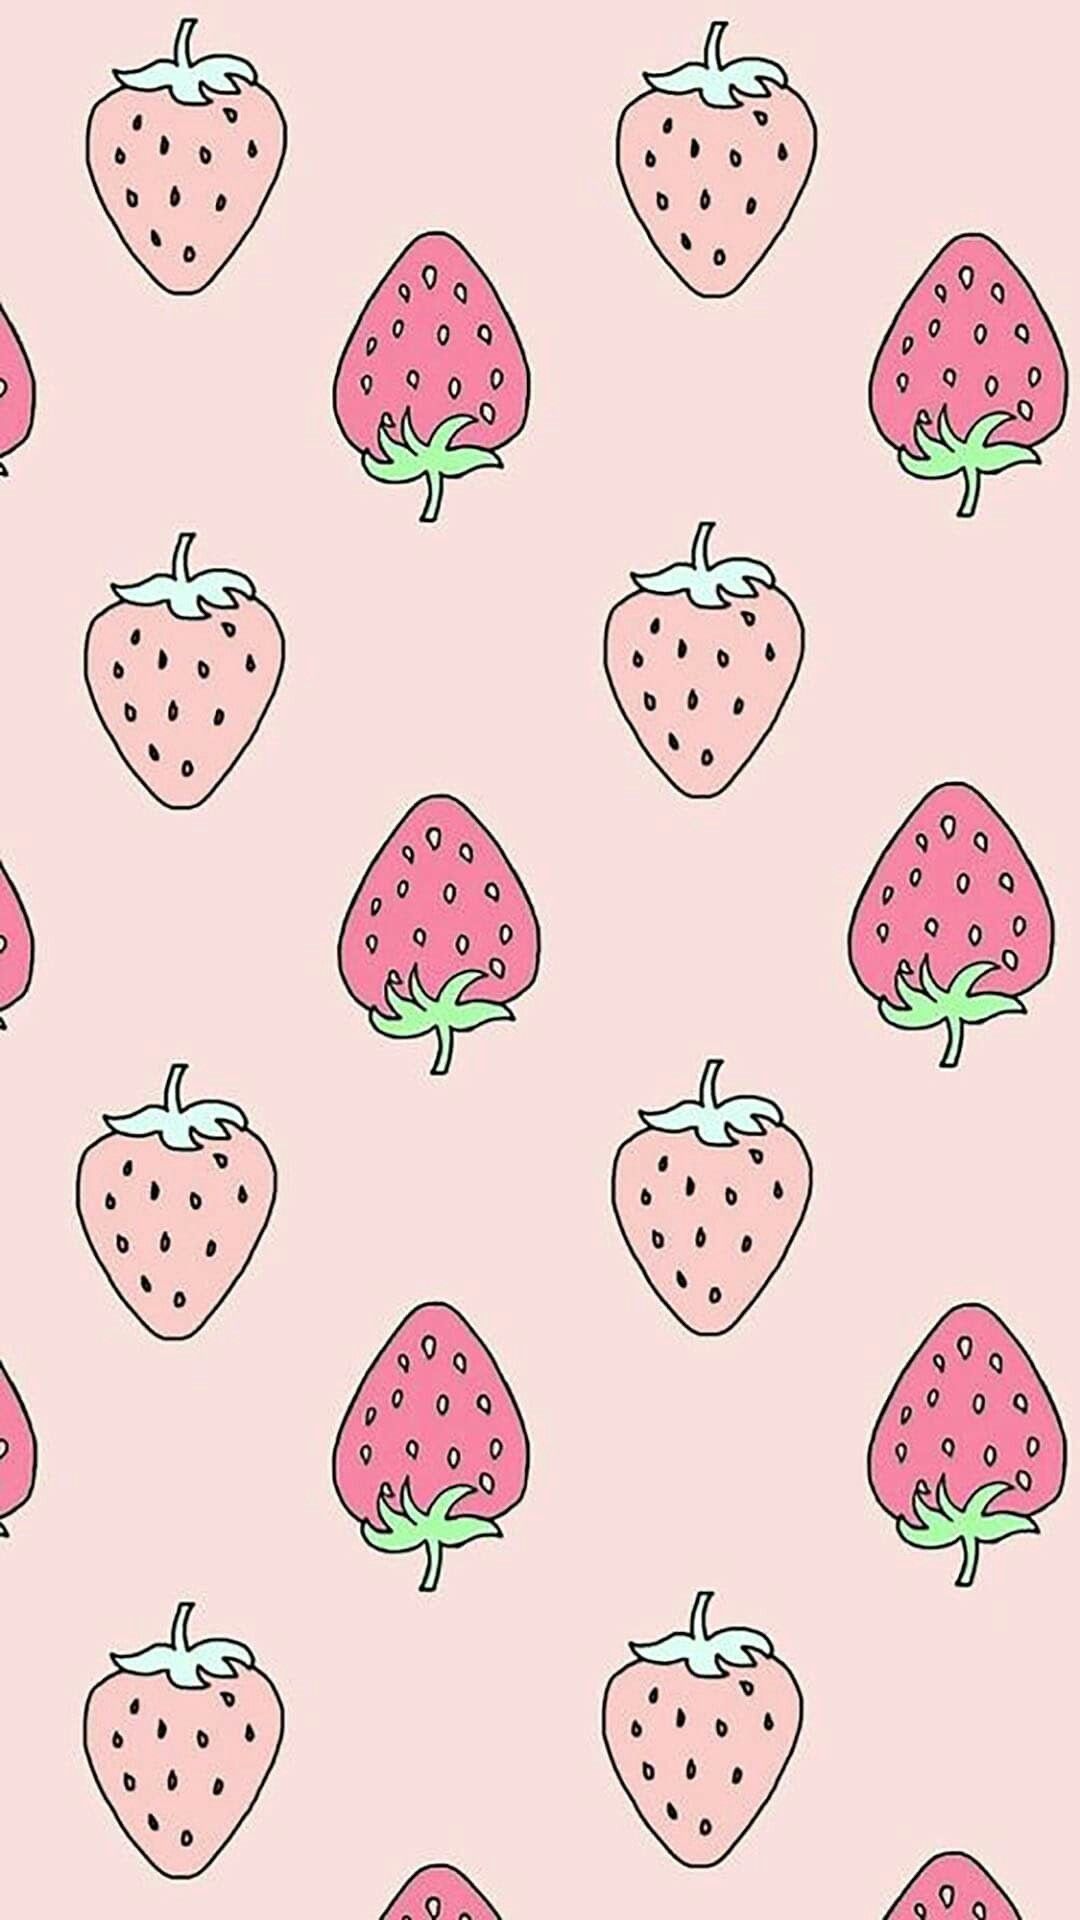 Cute Food HD Wallpaper Hupages Download iPhone Wallpaper. iPhone wallpaper pattern, Wallpaper iphone cute, Pink wallpaper iphone